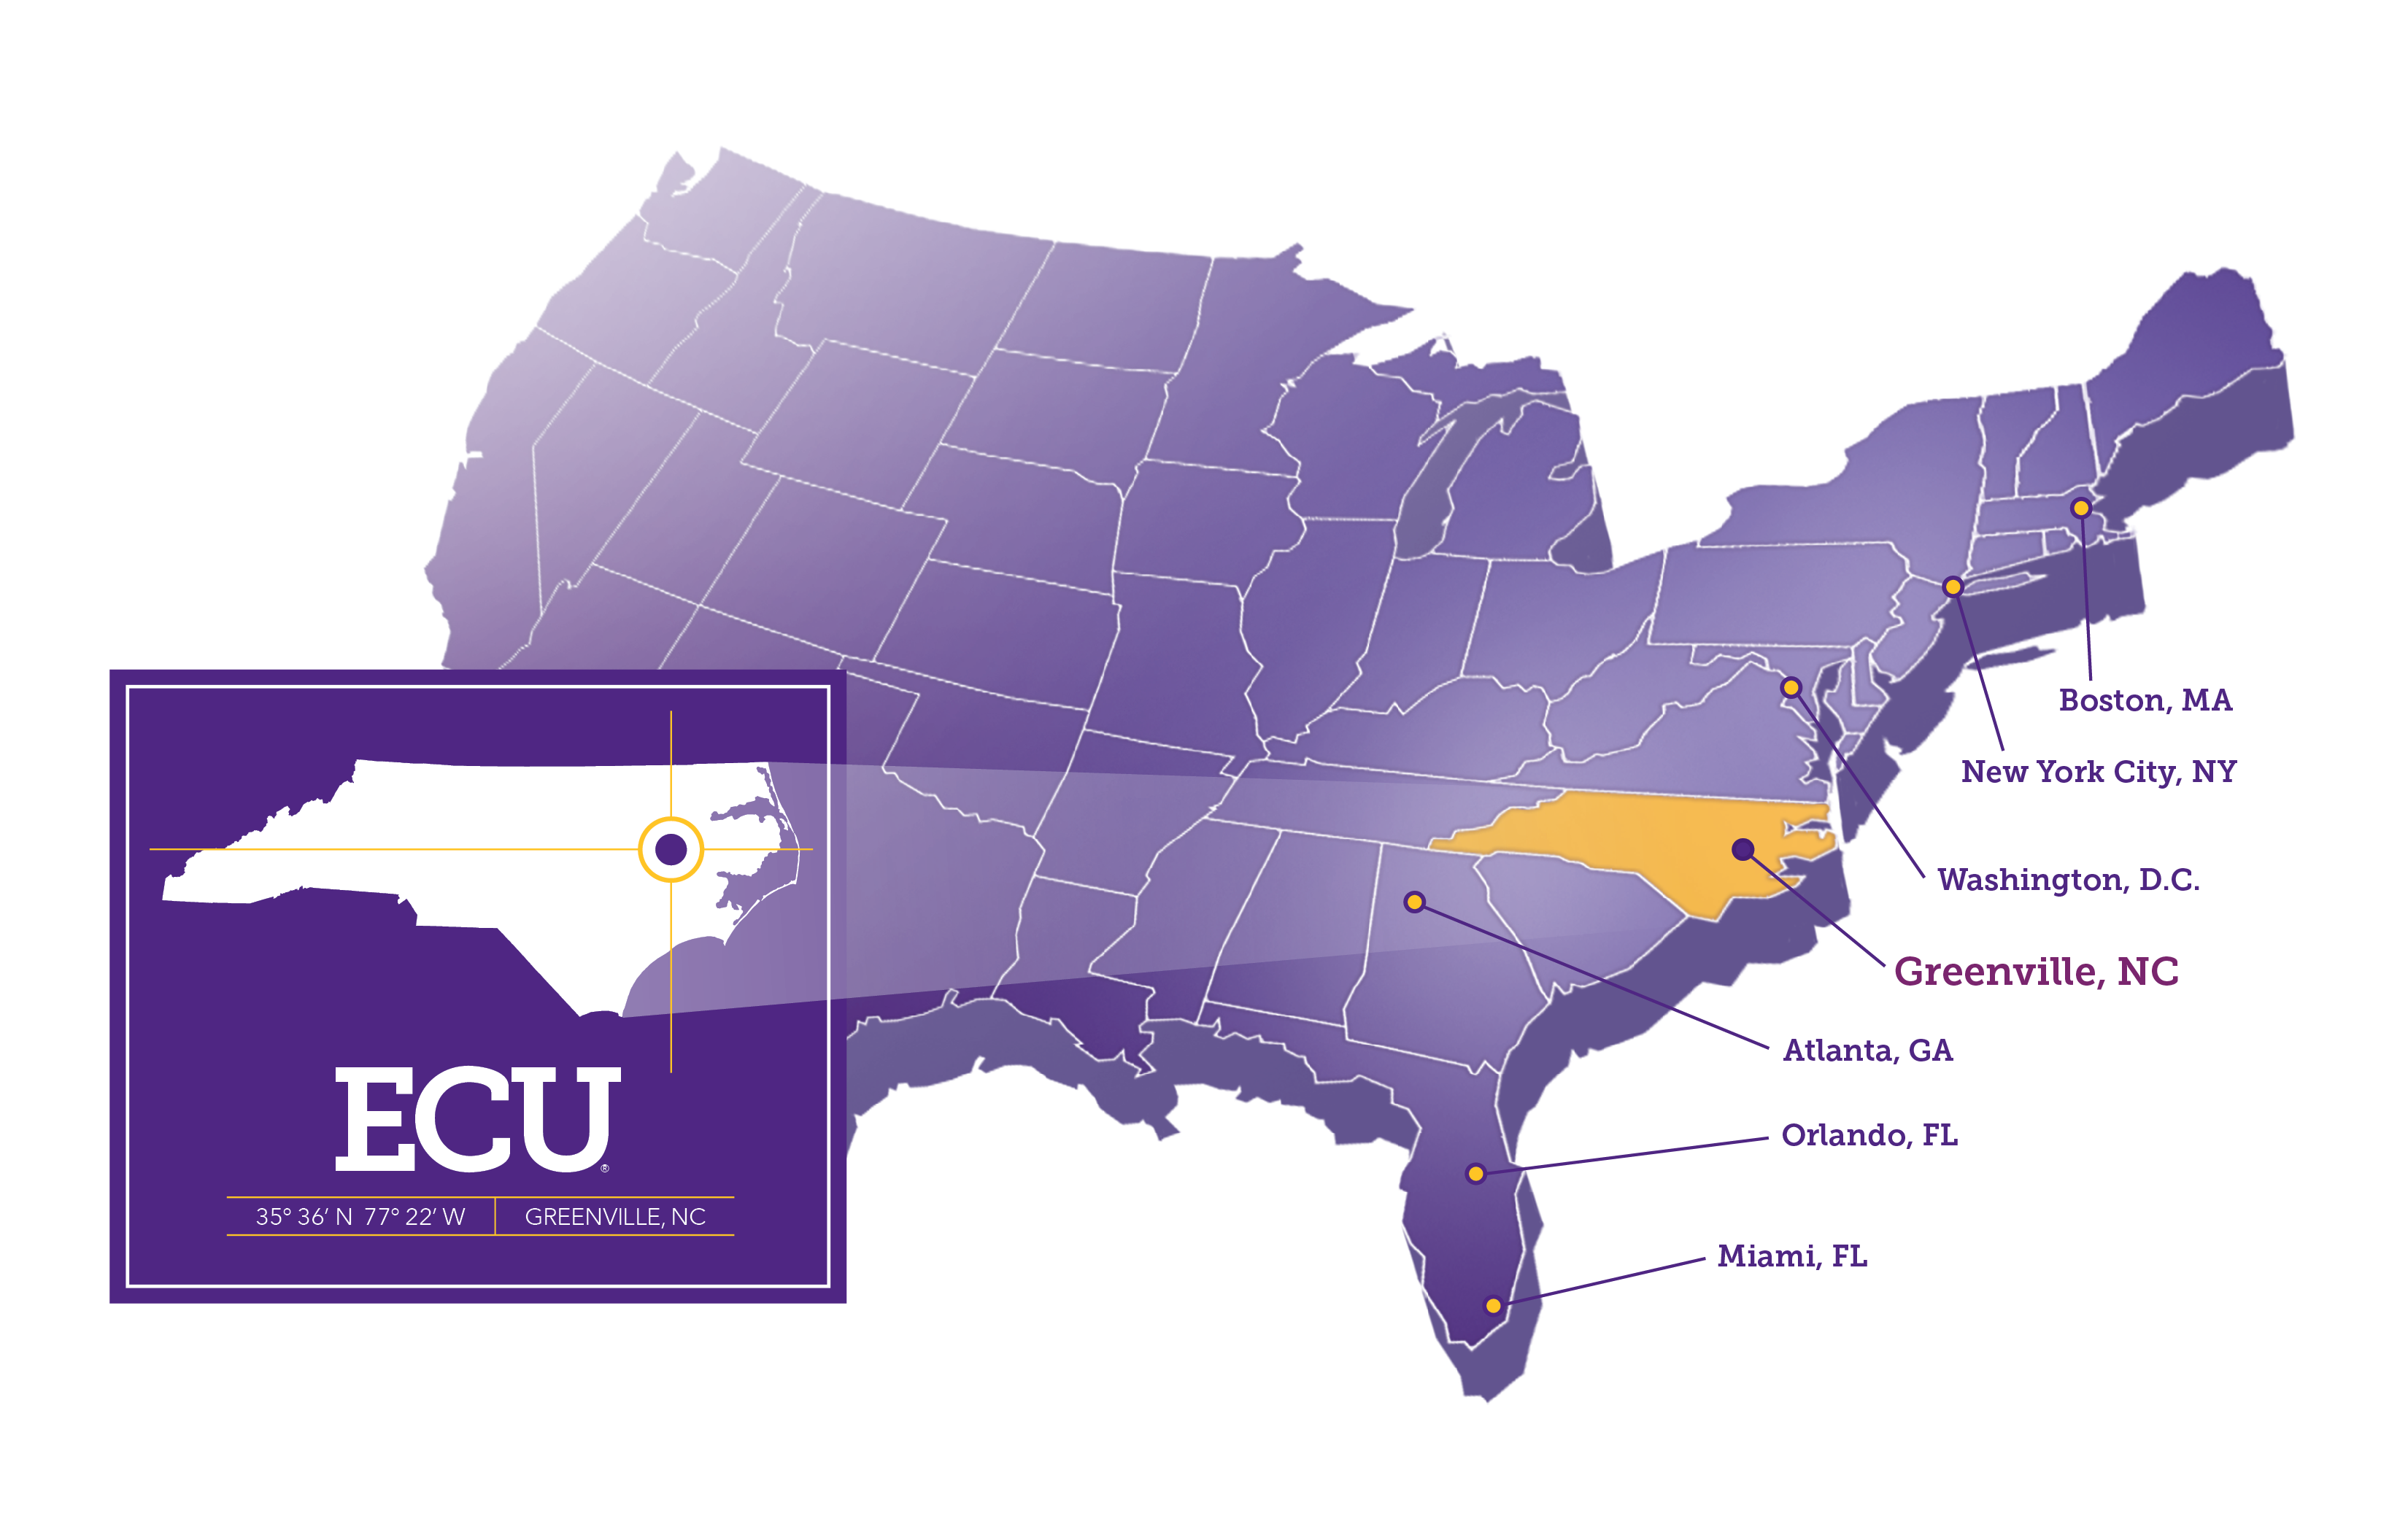 Denoting where ECU is located within the USA